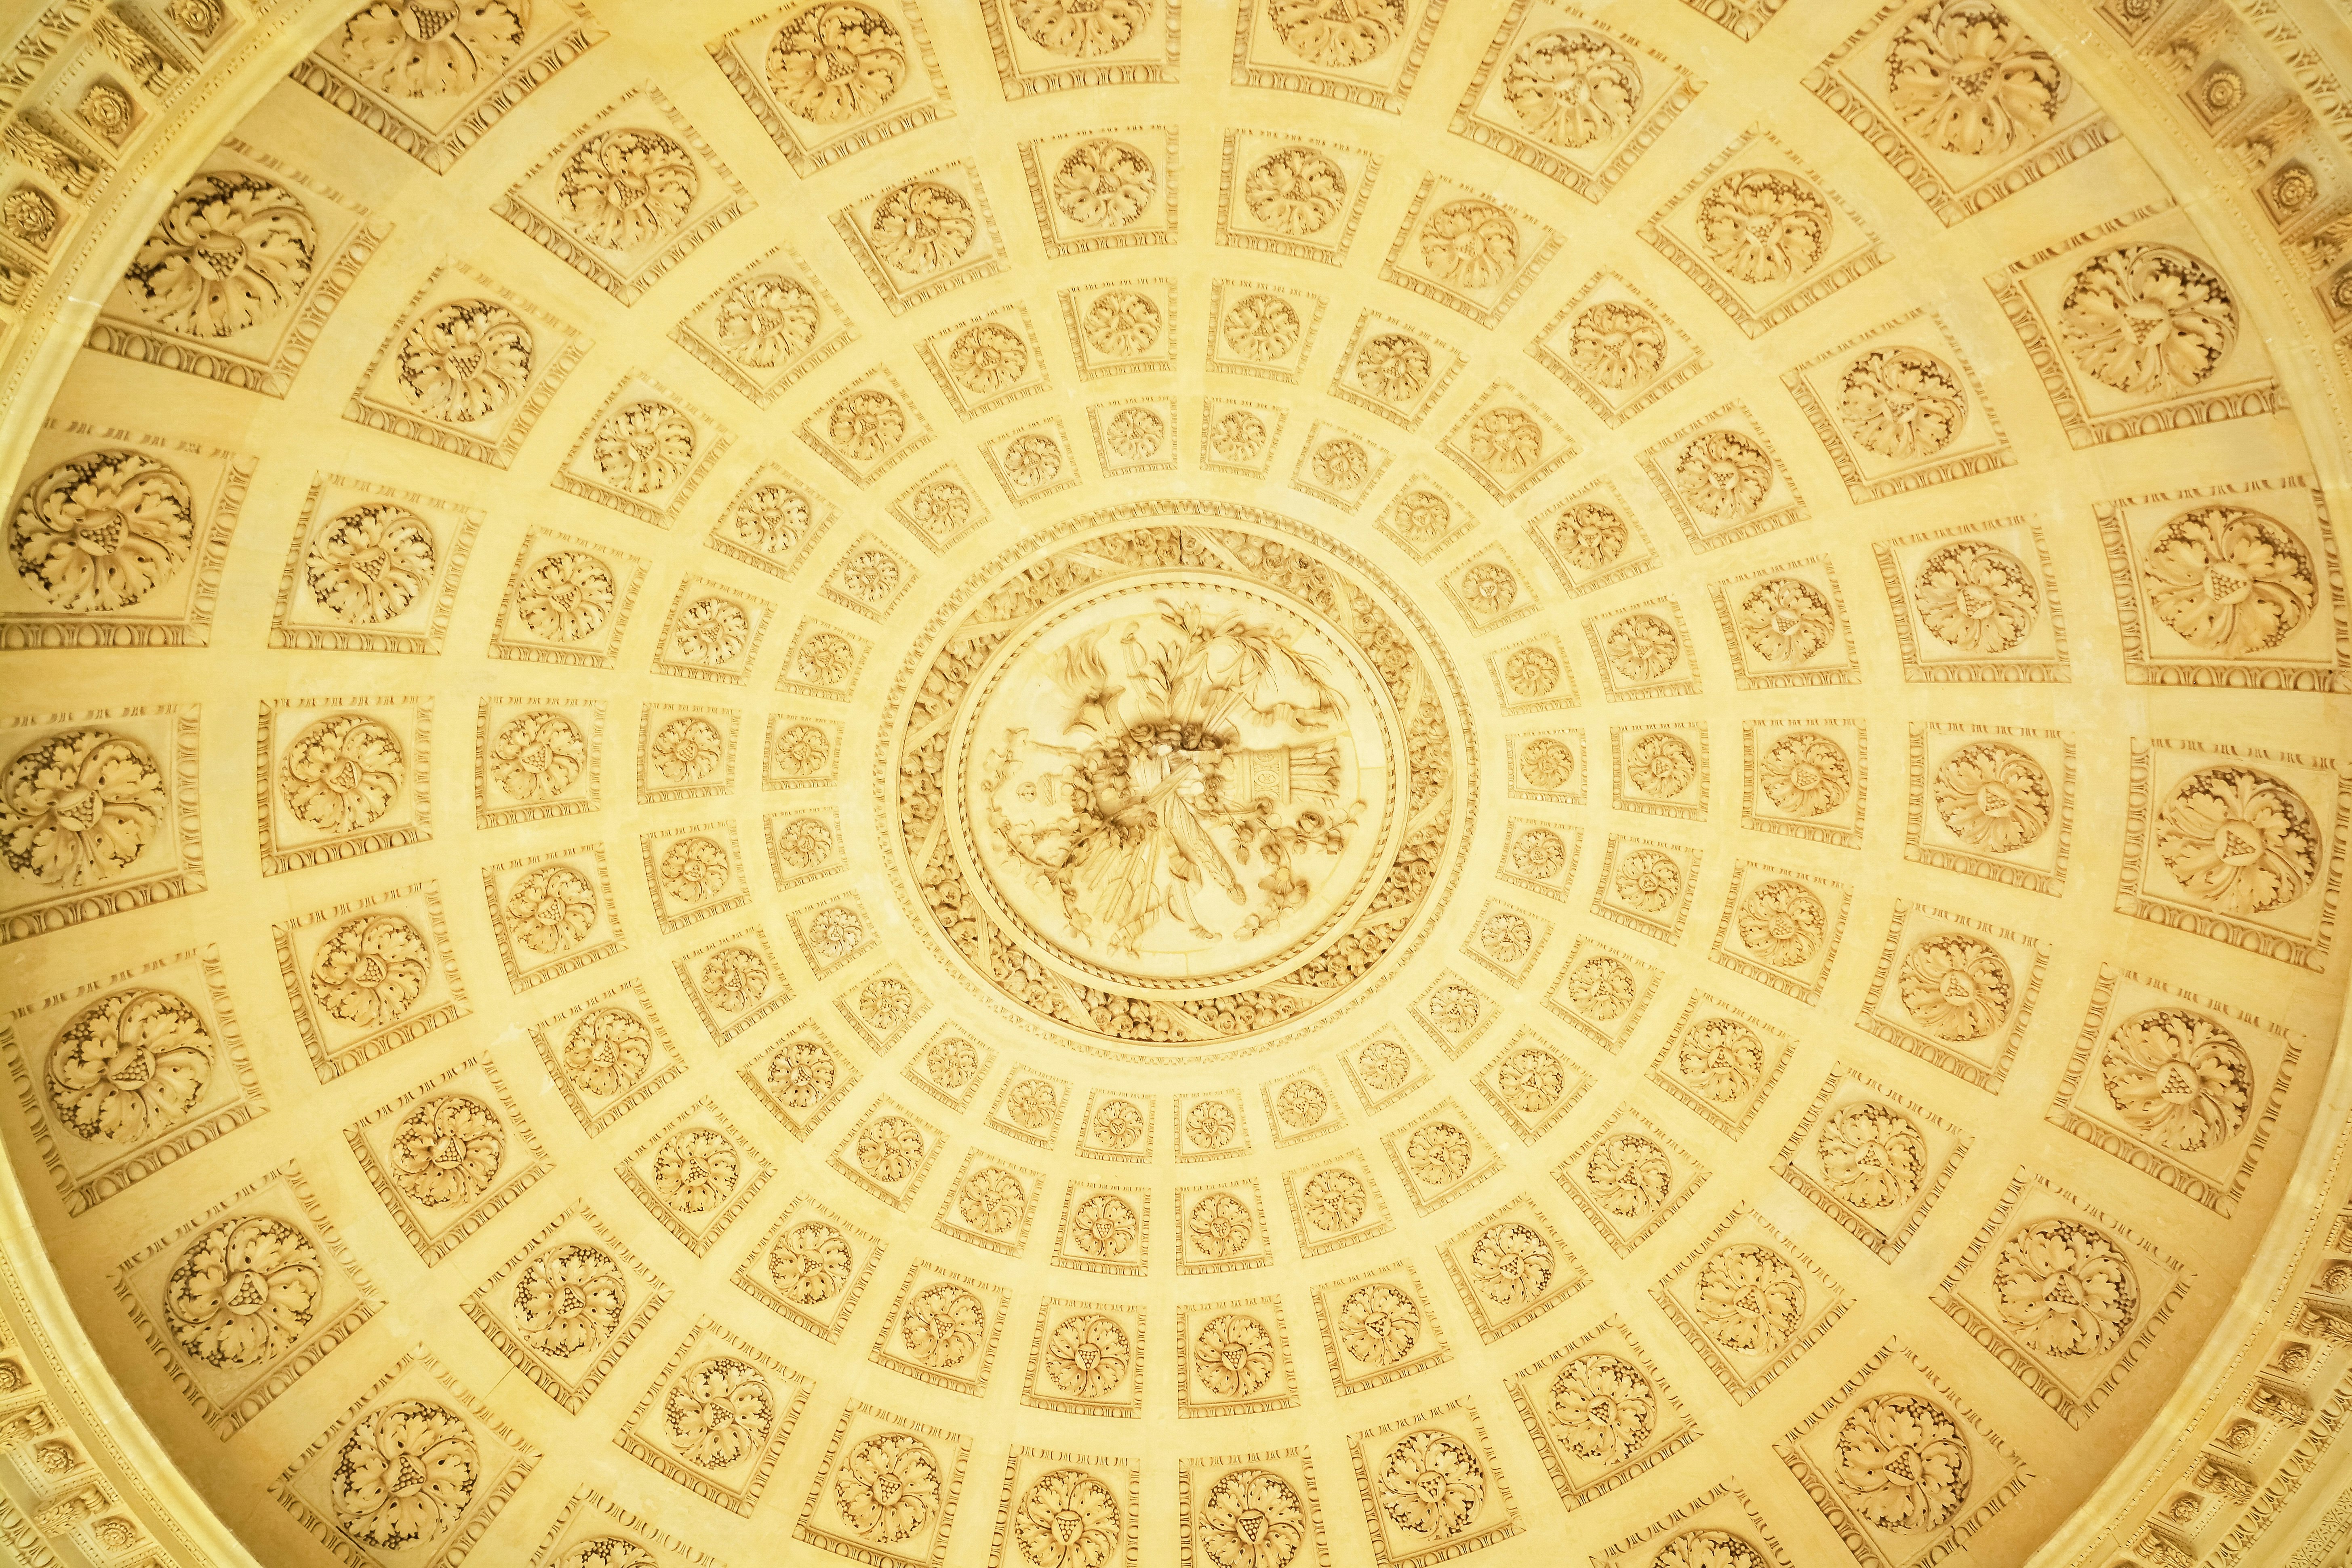 white and brown floral ceiling